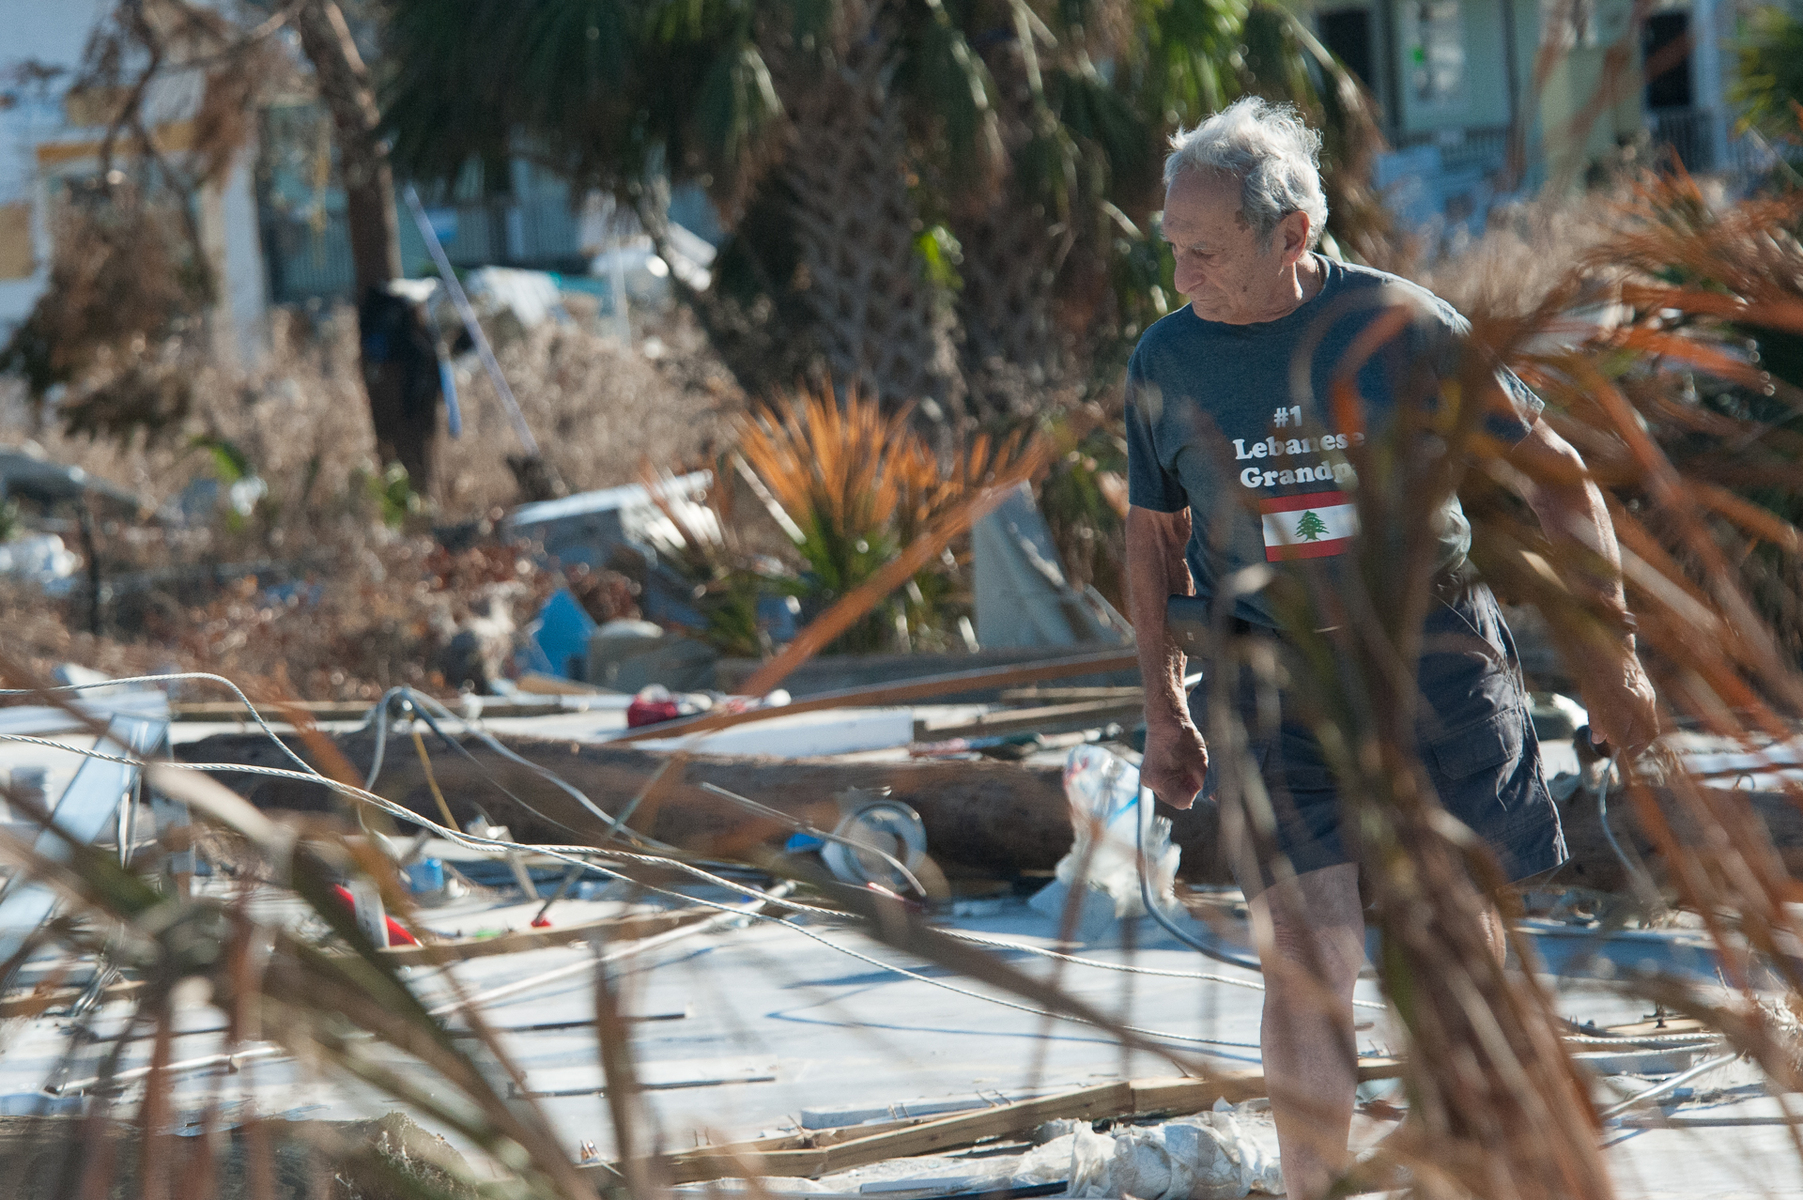 October 18, 2018 - Mexico Beach, FL - George Mamary of Atlanta, GA survey's what is left of his vacation home in Mexico Beach, Florida after Hurricane Michael as passed through the area on October 10, 2018. Florida.  The hurricane hit the Florida Panhandle as a category 5 storm causing massive damage and claimed the lives of more then a dozen people.